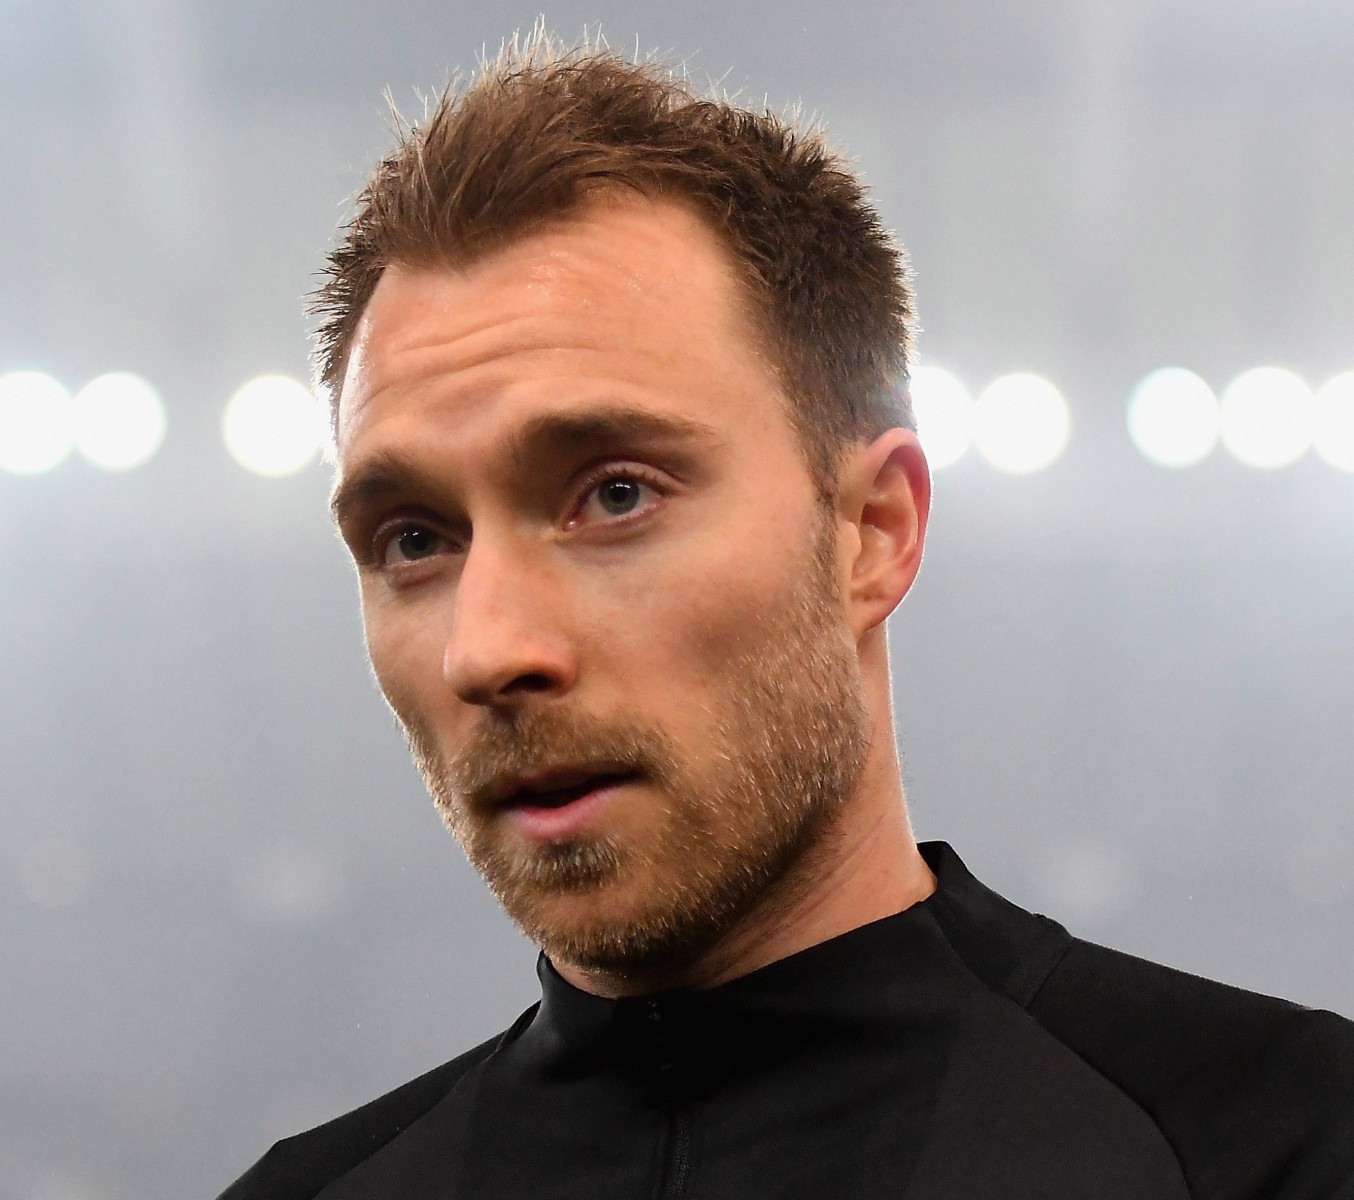 , Christian Eriksen slams Tottenham and claims he was the black sheep who got the blame for being bad guy